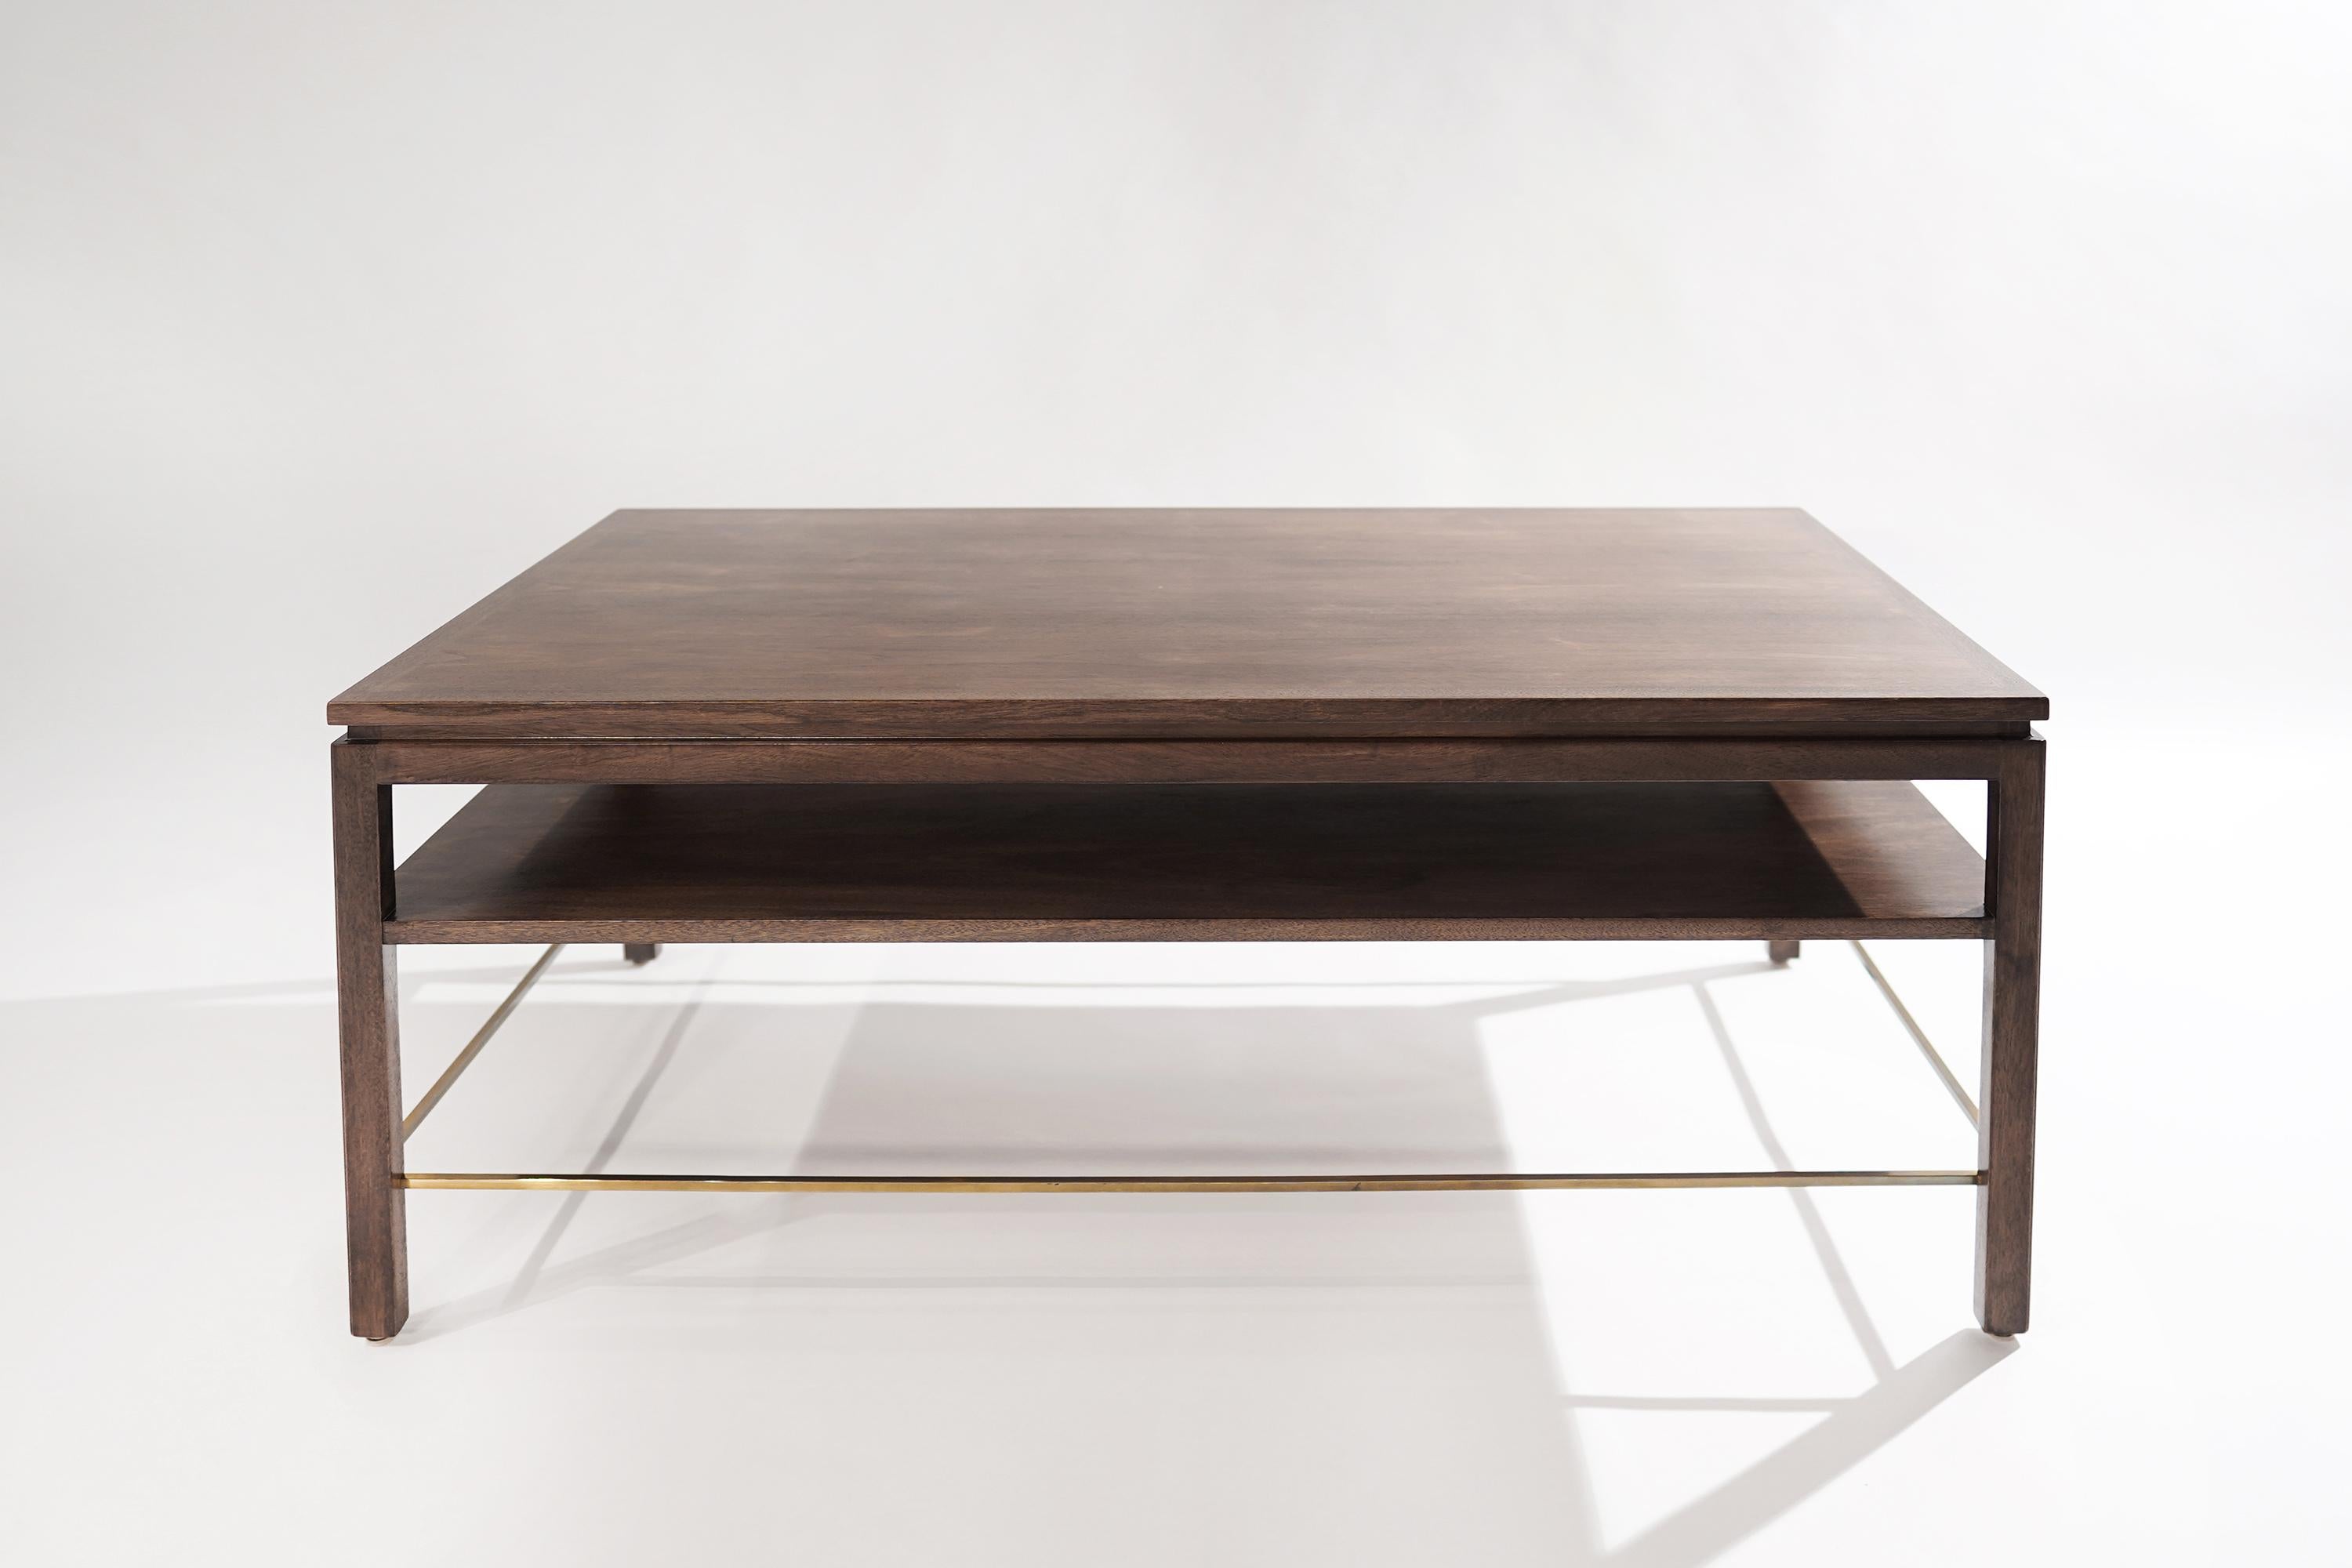 Walnut and mahogany coffee table designed by American icon Edward Wormley for Dunbar Furniture, Grand Rapids, Michigan, circa 1950-1959. Completely restored to its original integrity, featuring hand-polished brass stretchers.

Other designers of